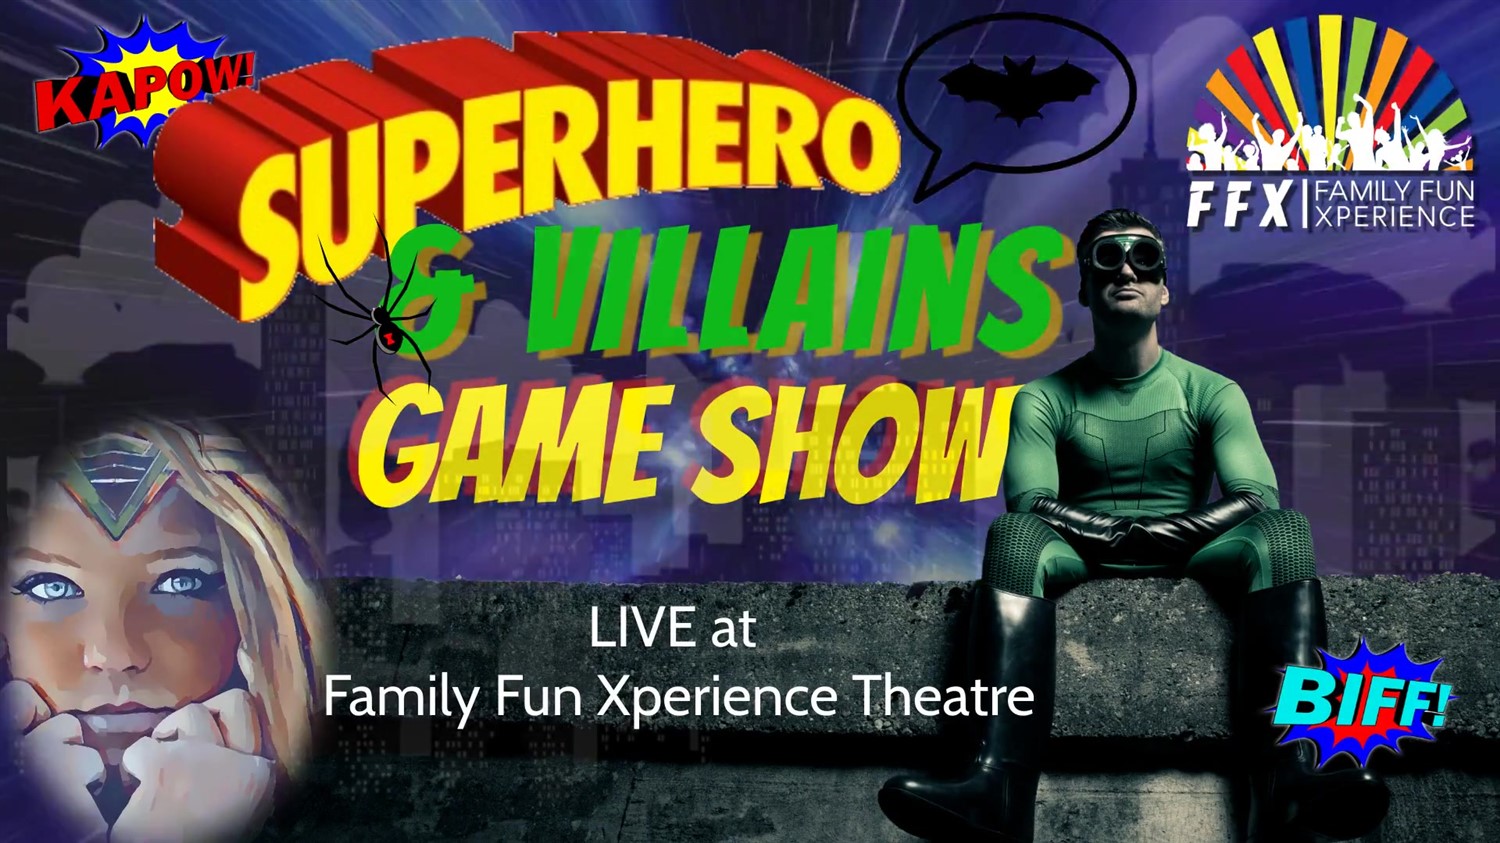 Superheroes & Villains: LIVE GAME SHOW!  on Mar 01, 19:00@FFX Theatre - Buy tickets and Get information on Family Fun Xperience tickets.ffxshow.org